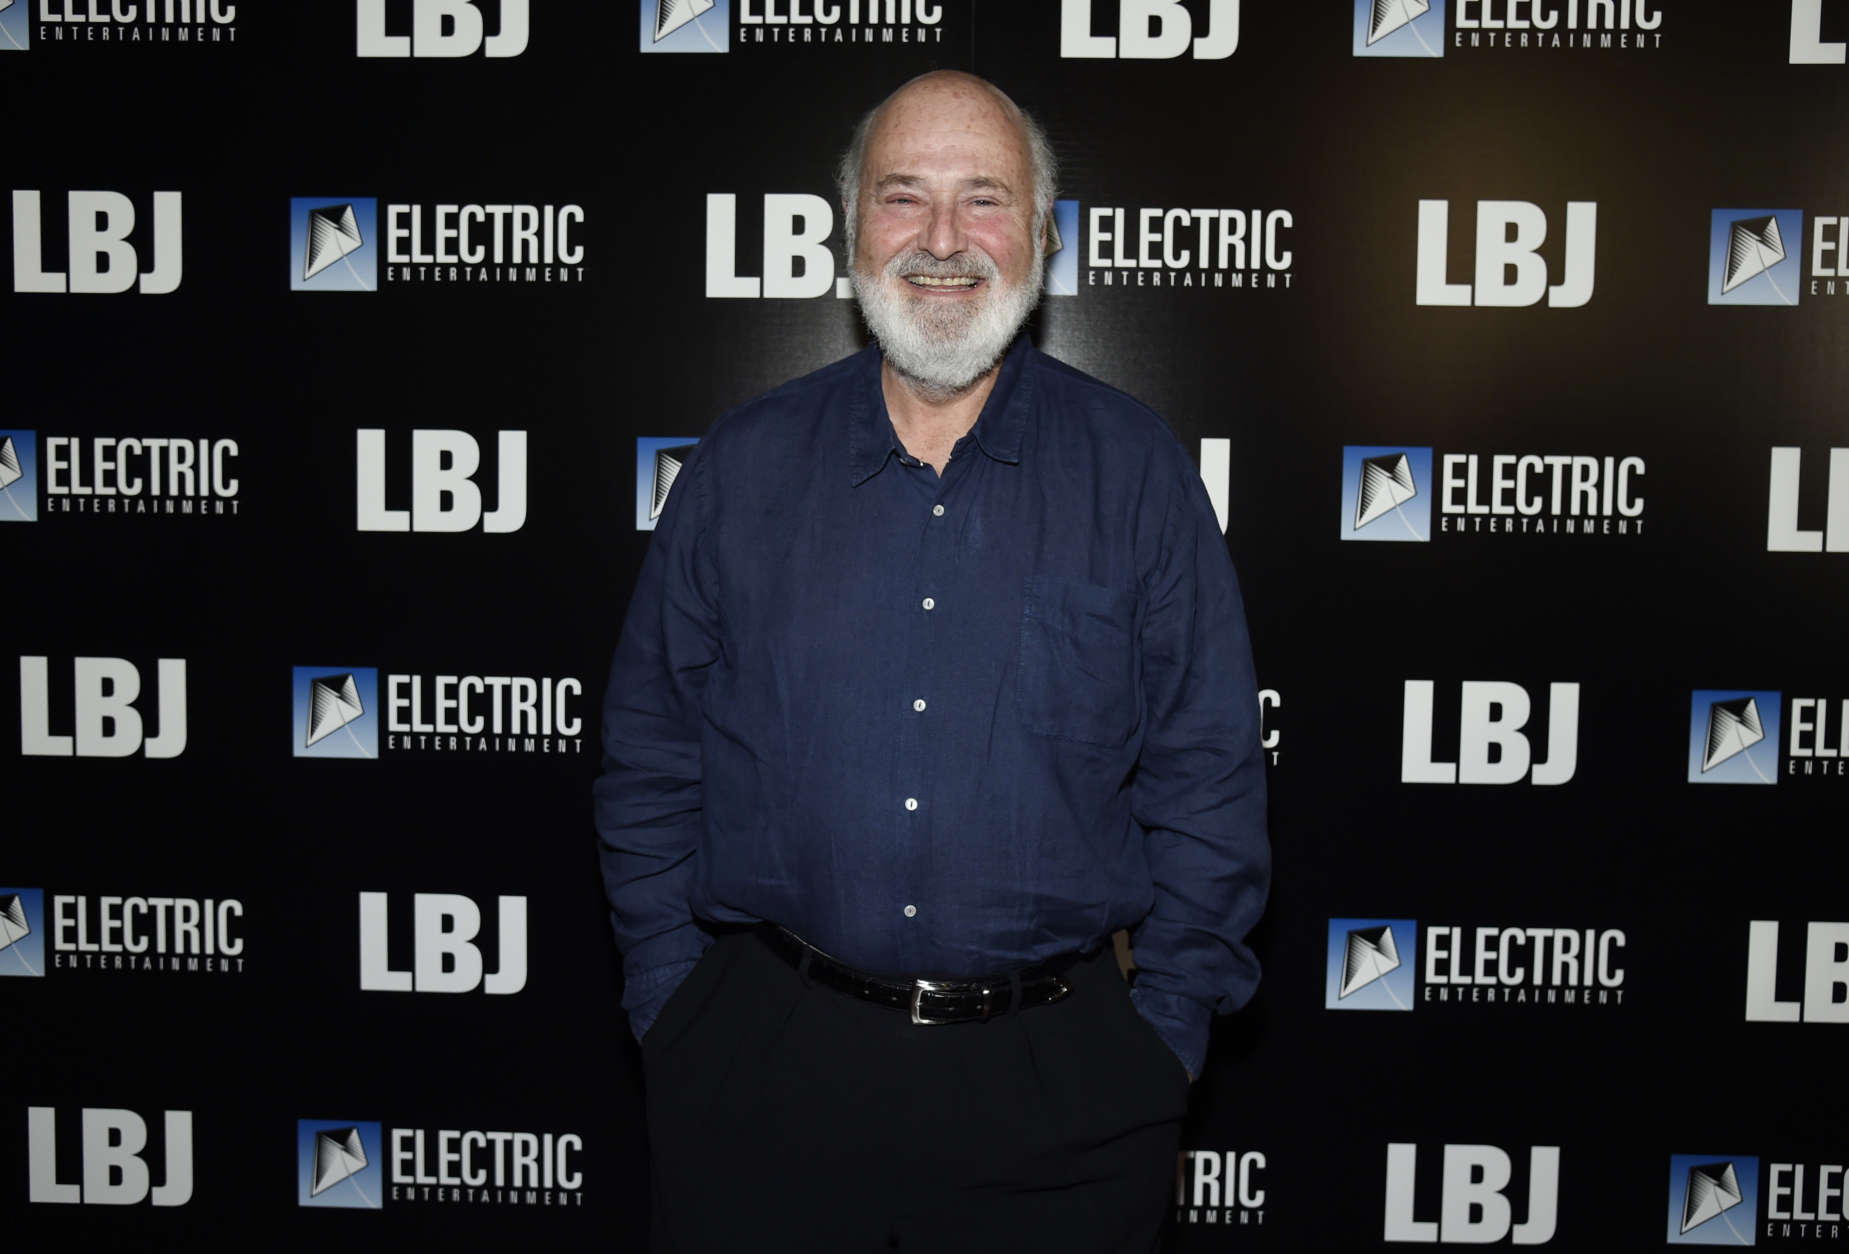 Rob Reiner, the director/producer of "LBJ," poses at the premiere of the film at the ArcLight Hollywood on Tuesday, Oct. 24, 2017, in Los Angeles. (Photo by Chris Pizzello/Invision/AP)